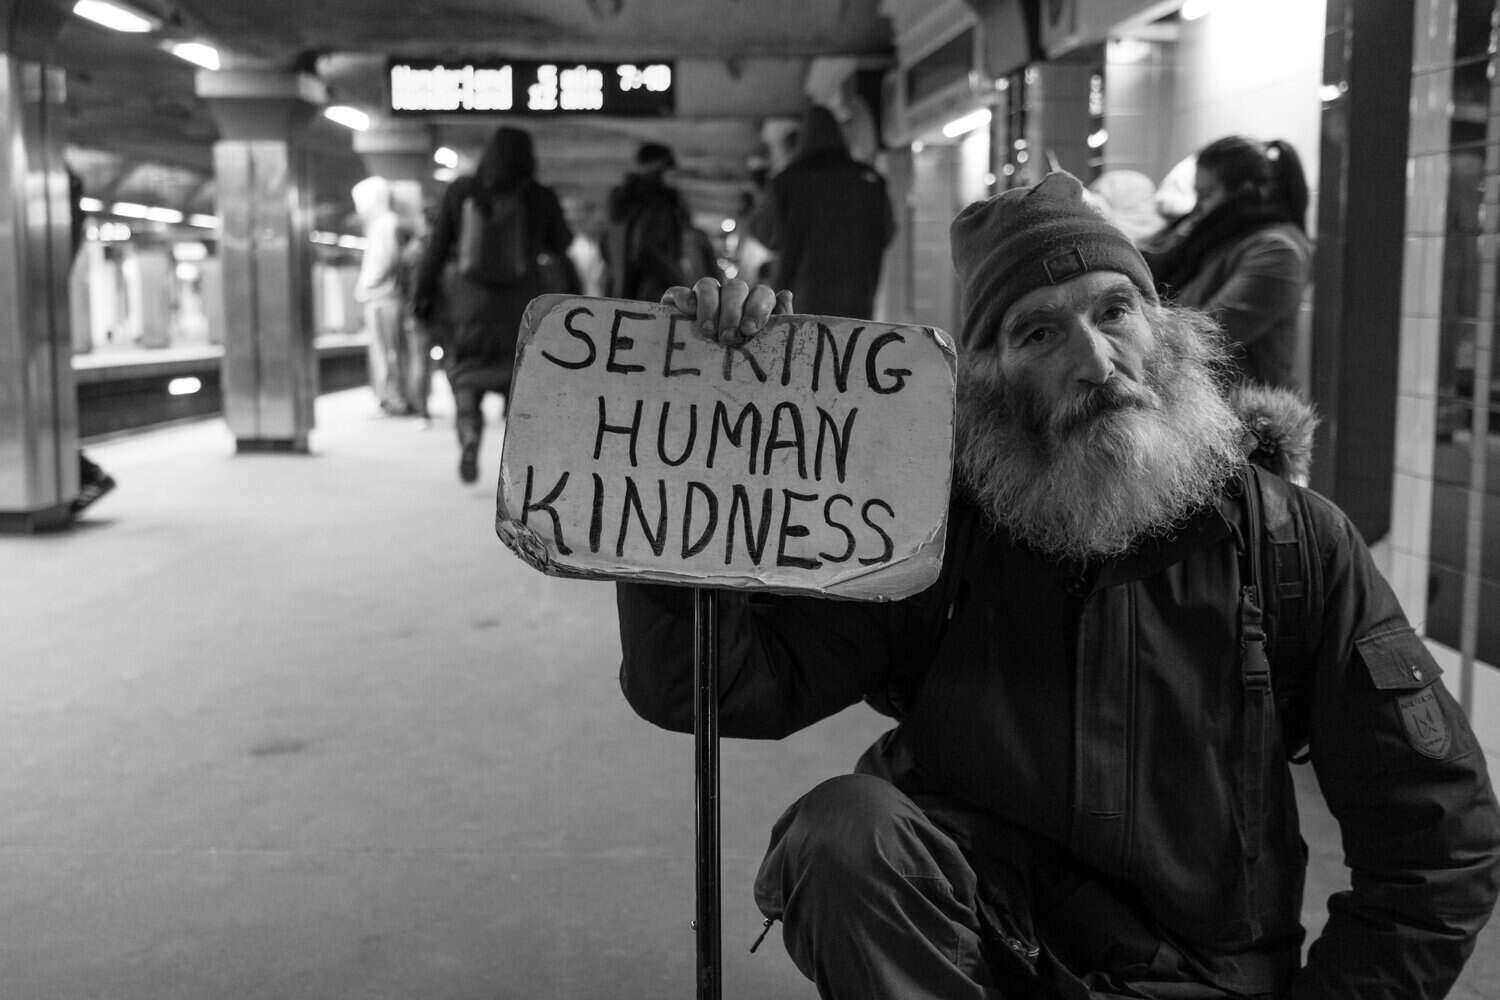 A homeless man with a hand-made sign that asks for human kindness.